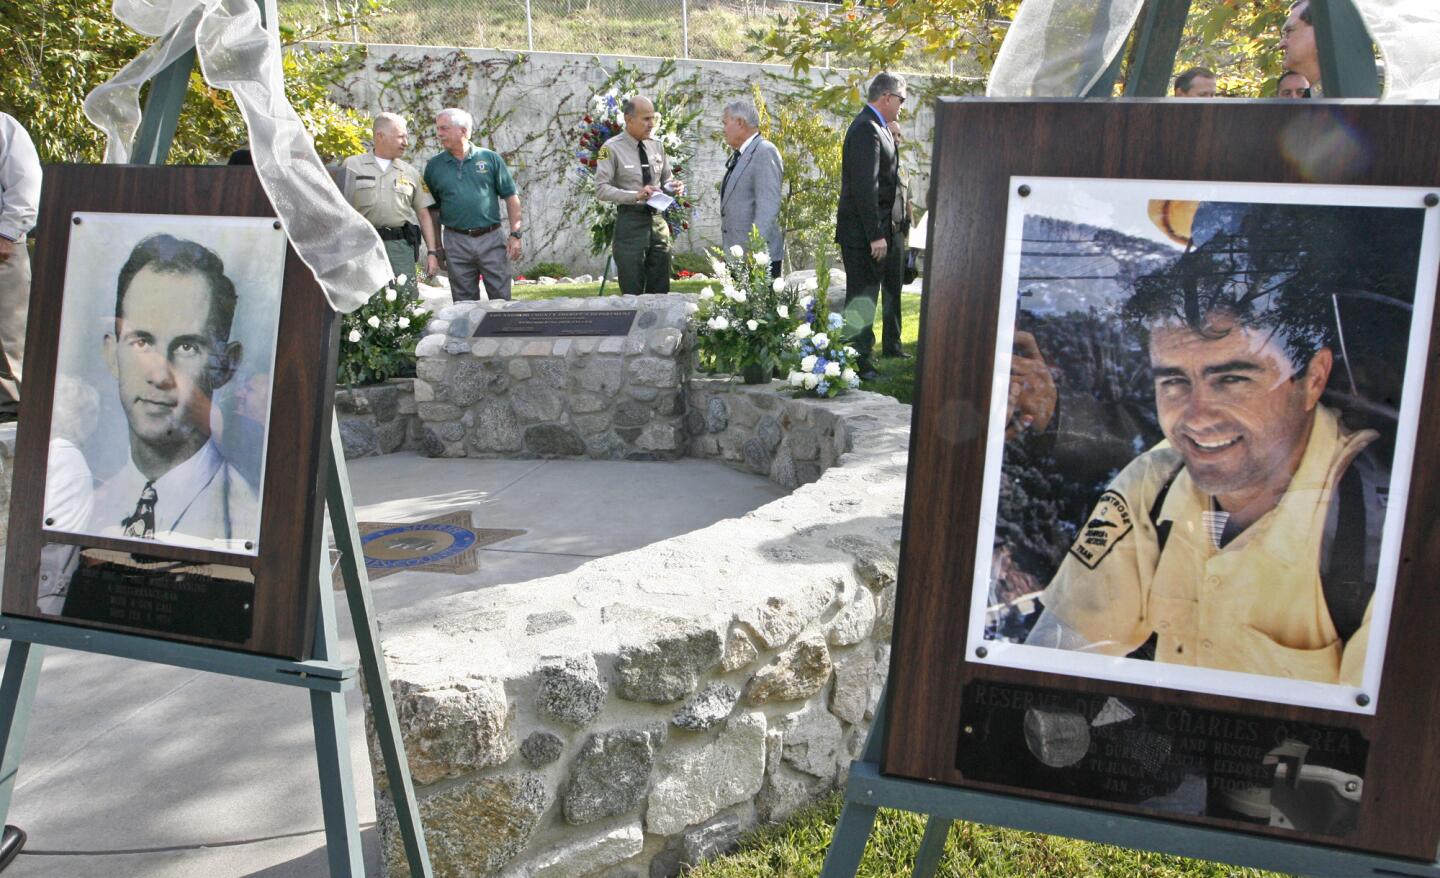 Los Angeles County Sheriff Lee Baca, center talks to attendees of a memorial dedication at the CV Sheriff's station for fallen deputies David A. Horr, left and Charles O. Rea, right, on Monday, October 24, 2011.